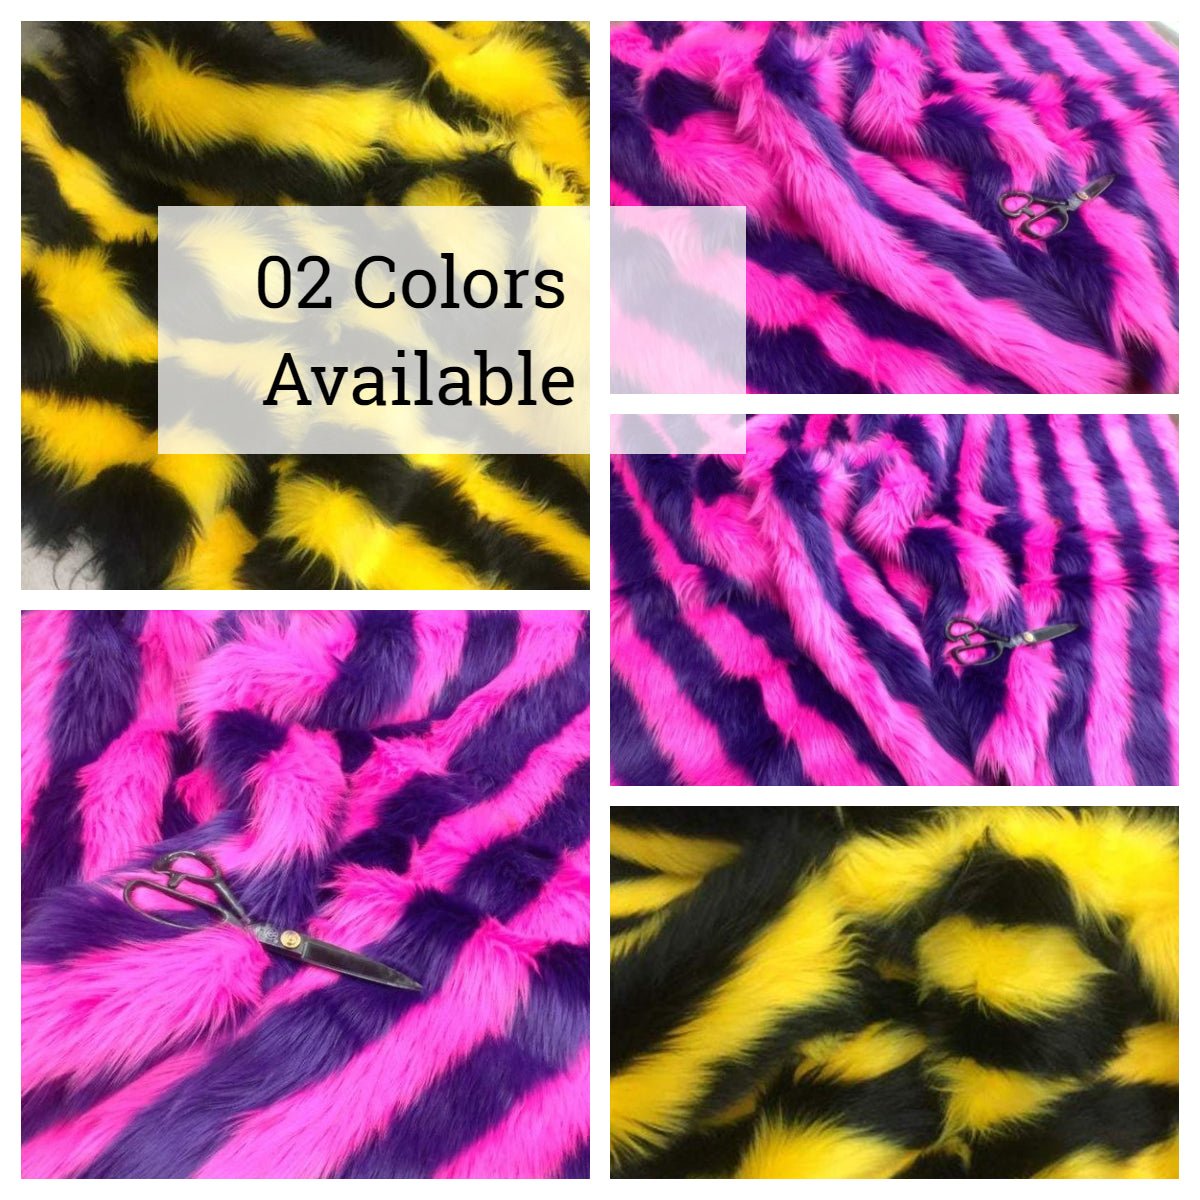 Faux Fur 2 Tone Stripe Long Pile Fabric For Fur Coats, Fur Clothing, Blankets, Bed Spreads, Throw BlanketsICEFABRICICE FABRICSBlack/YellowBy The Yard (60 inches Wide)Faux Fur 2 Tone Stripe Long Pile Fabric For Fur Coats, Fur Clothing, Blankets, Bed Spreads, Throw Blankets ICEFABRIC